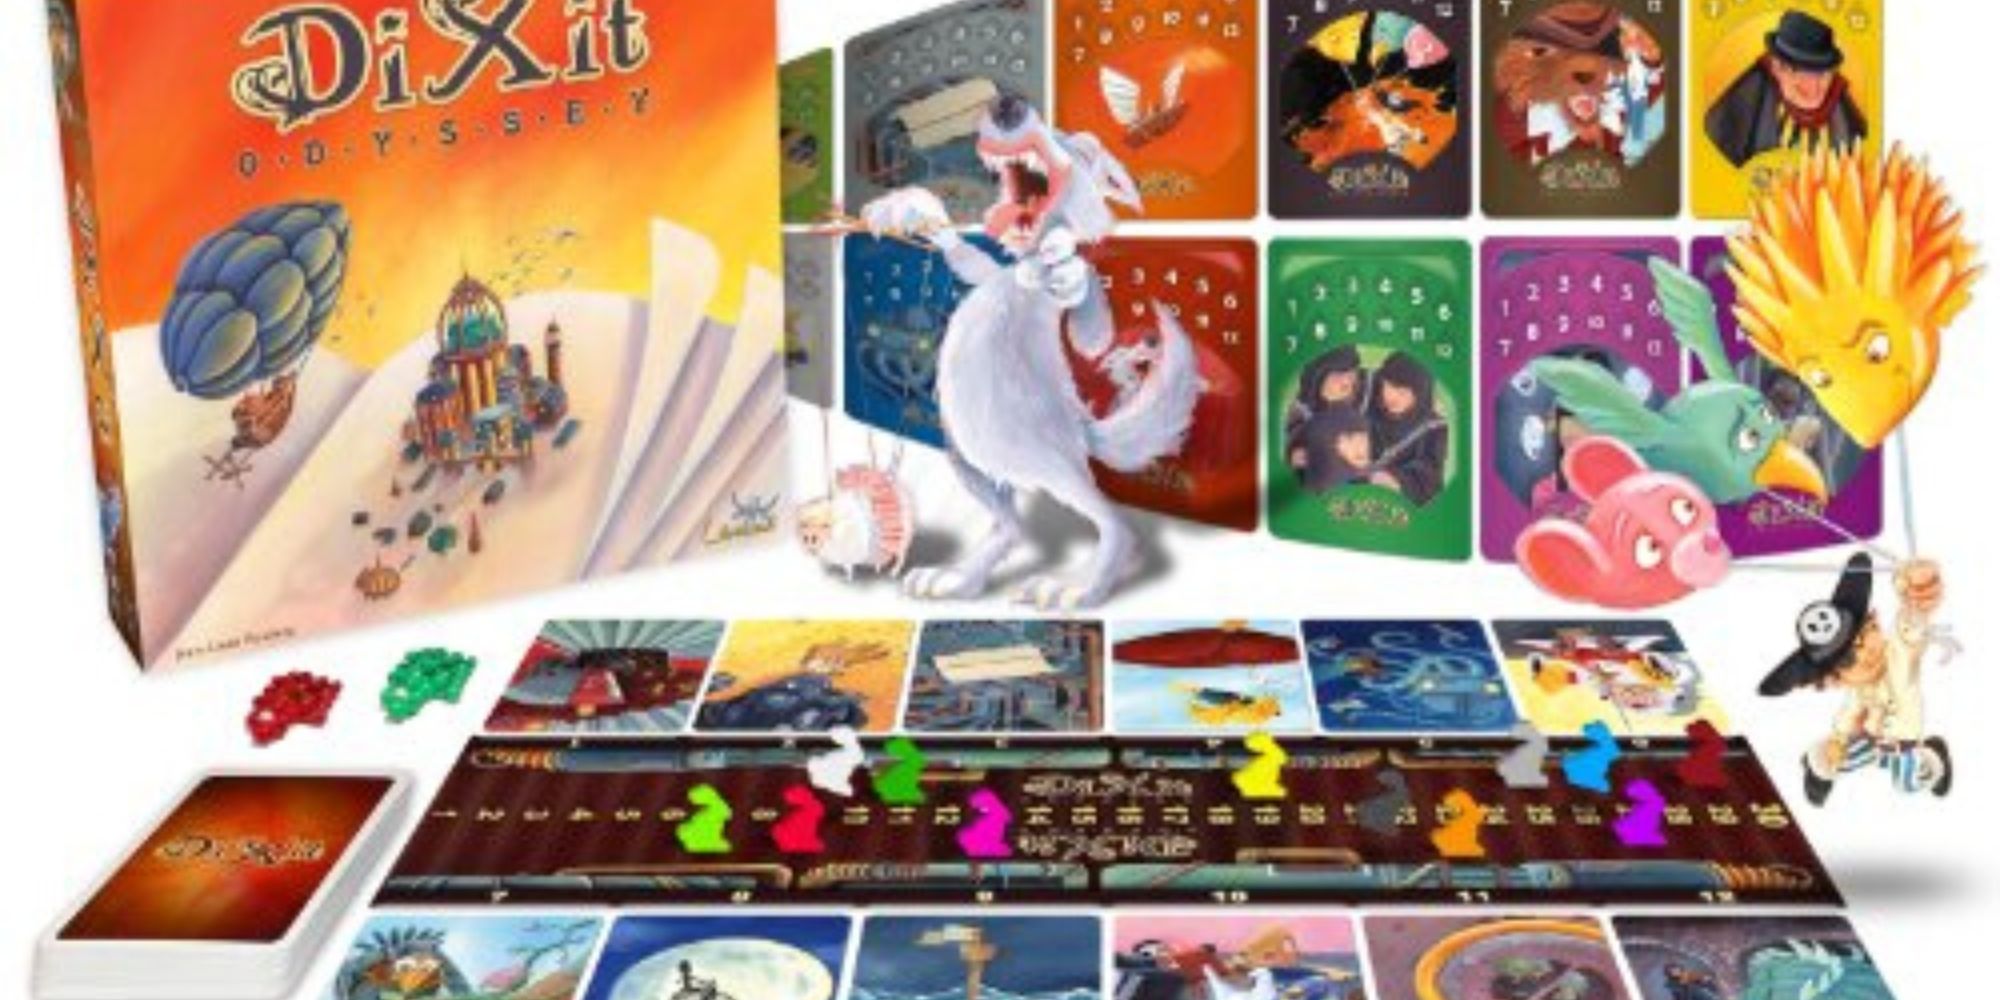 components of Dixit Odyssey